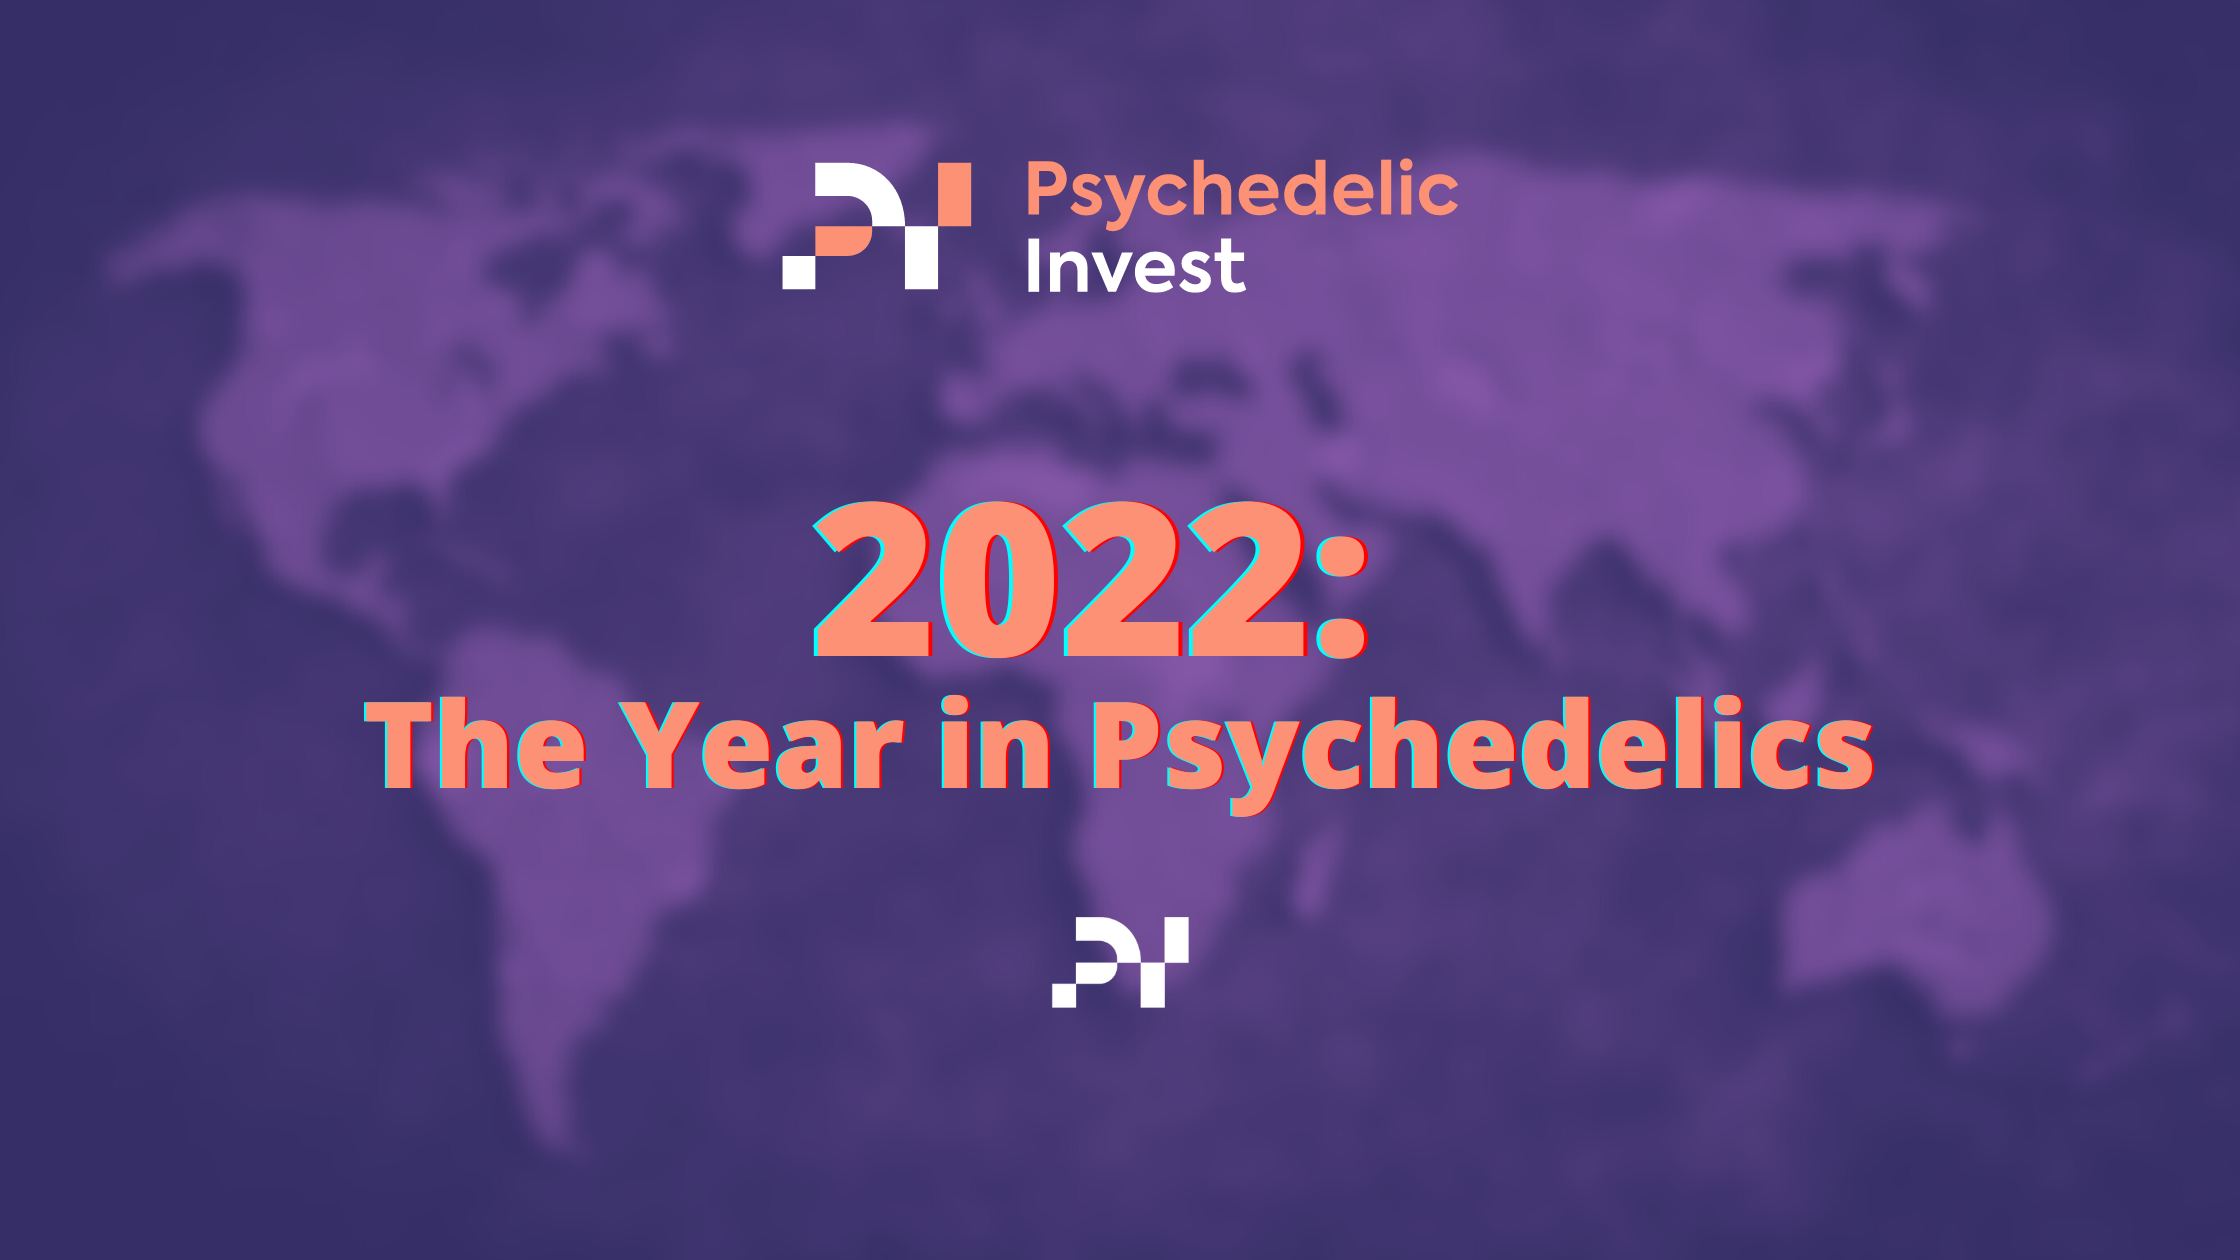 2022: The Year in Psychedelics